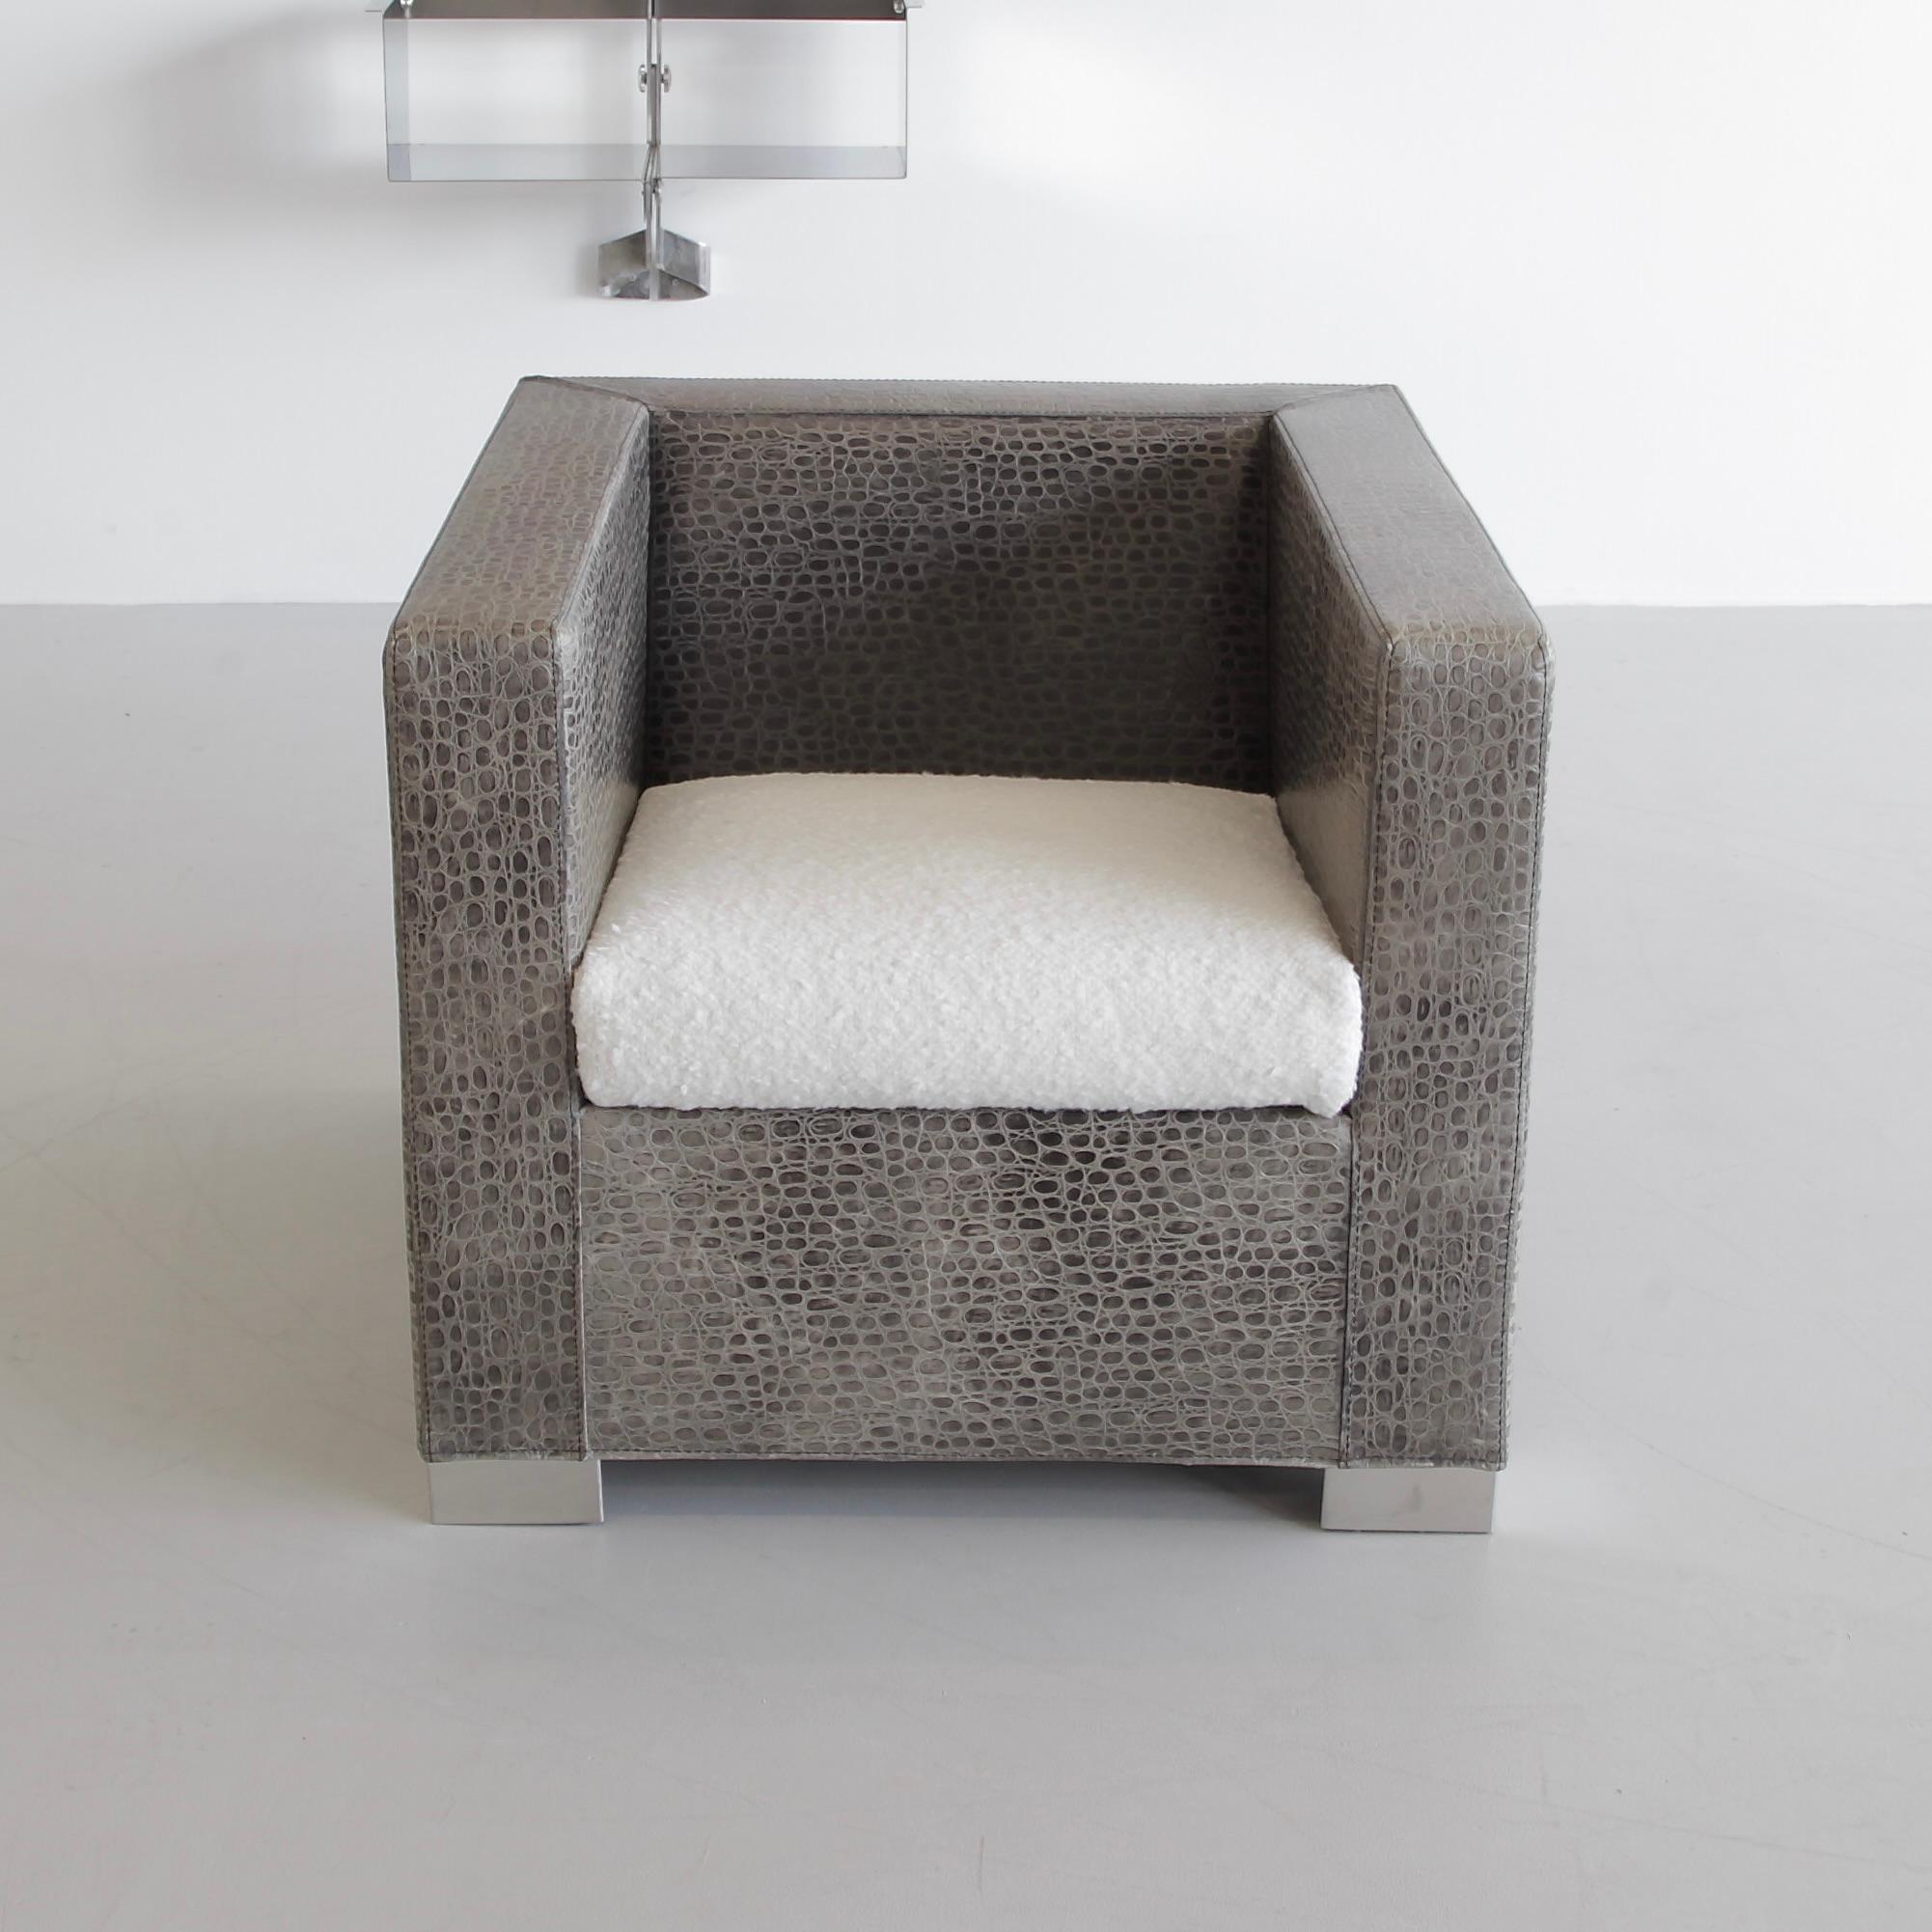 Armchair designed by Rodolfo Dordoni. Italy, Minotti, 1997.

The cubic armchair from the 'Suitcase' line by Minotti. Upholstered in printed leather with 'reptile look', new boucle covered cushion and chrome base.